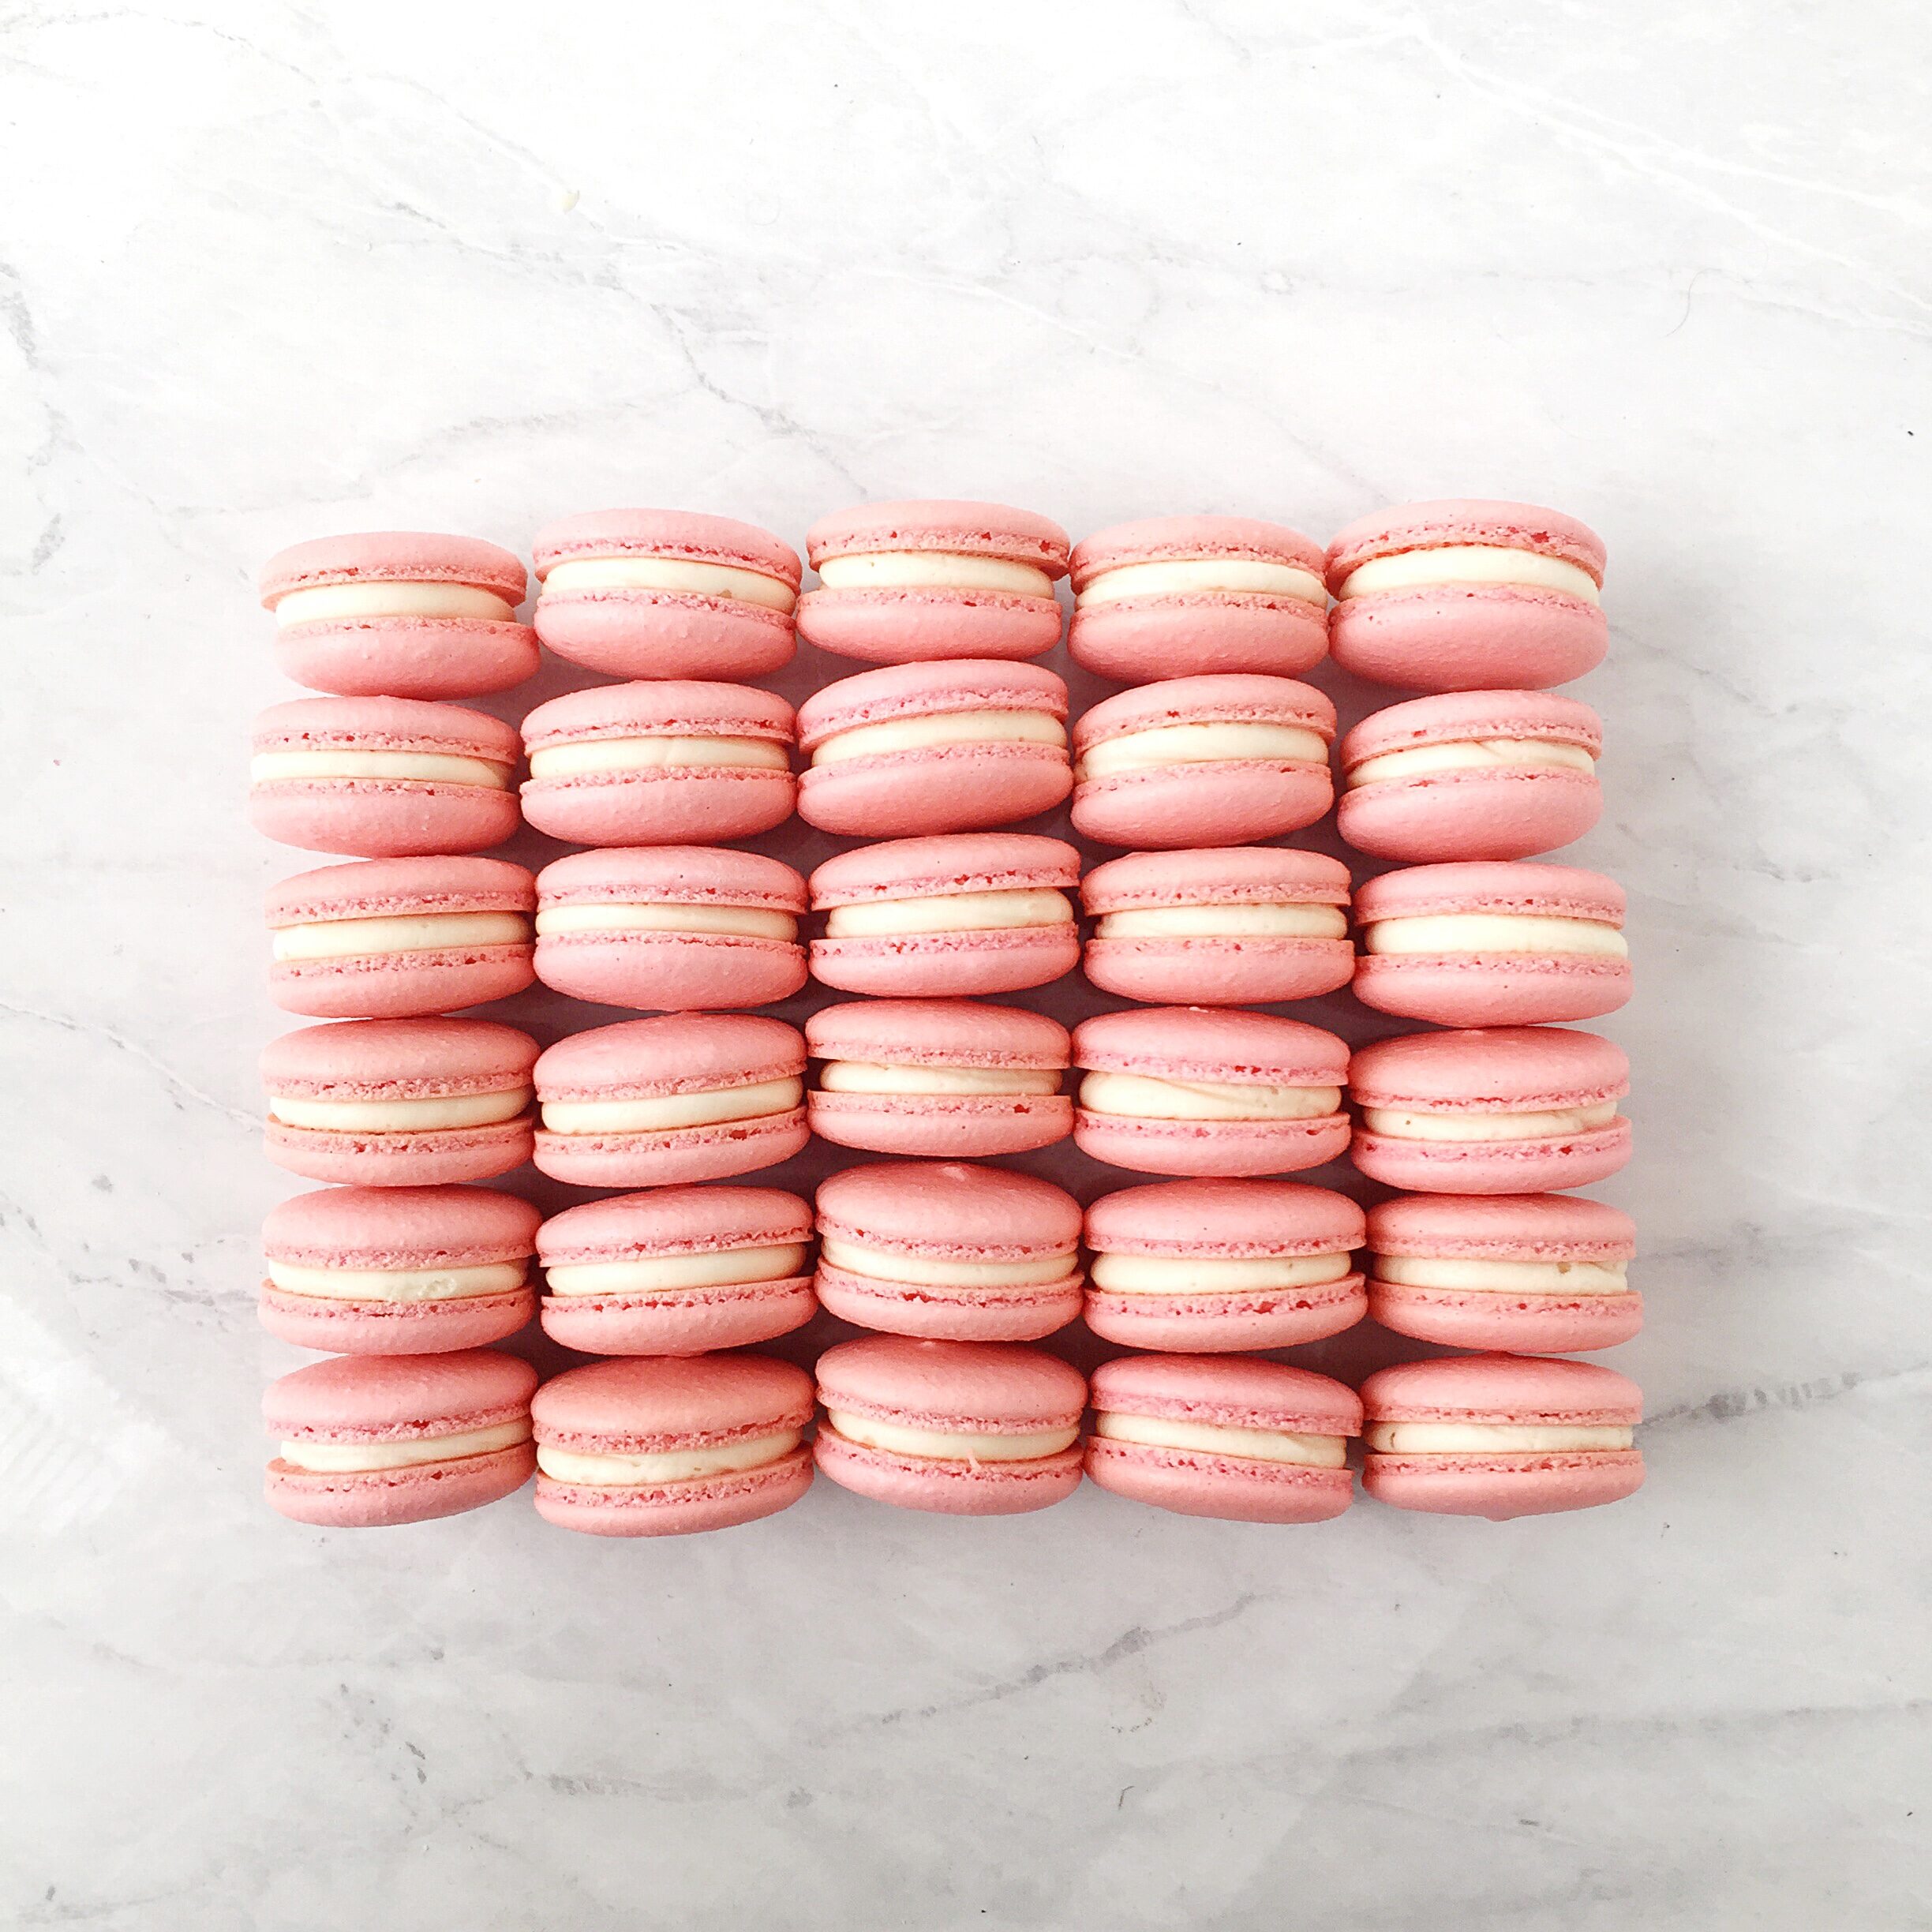 french macarons recipe step by step